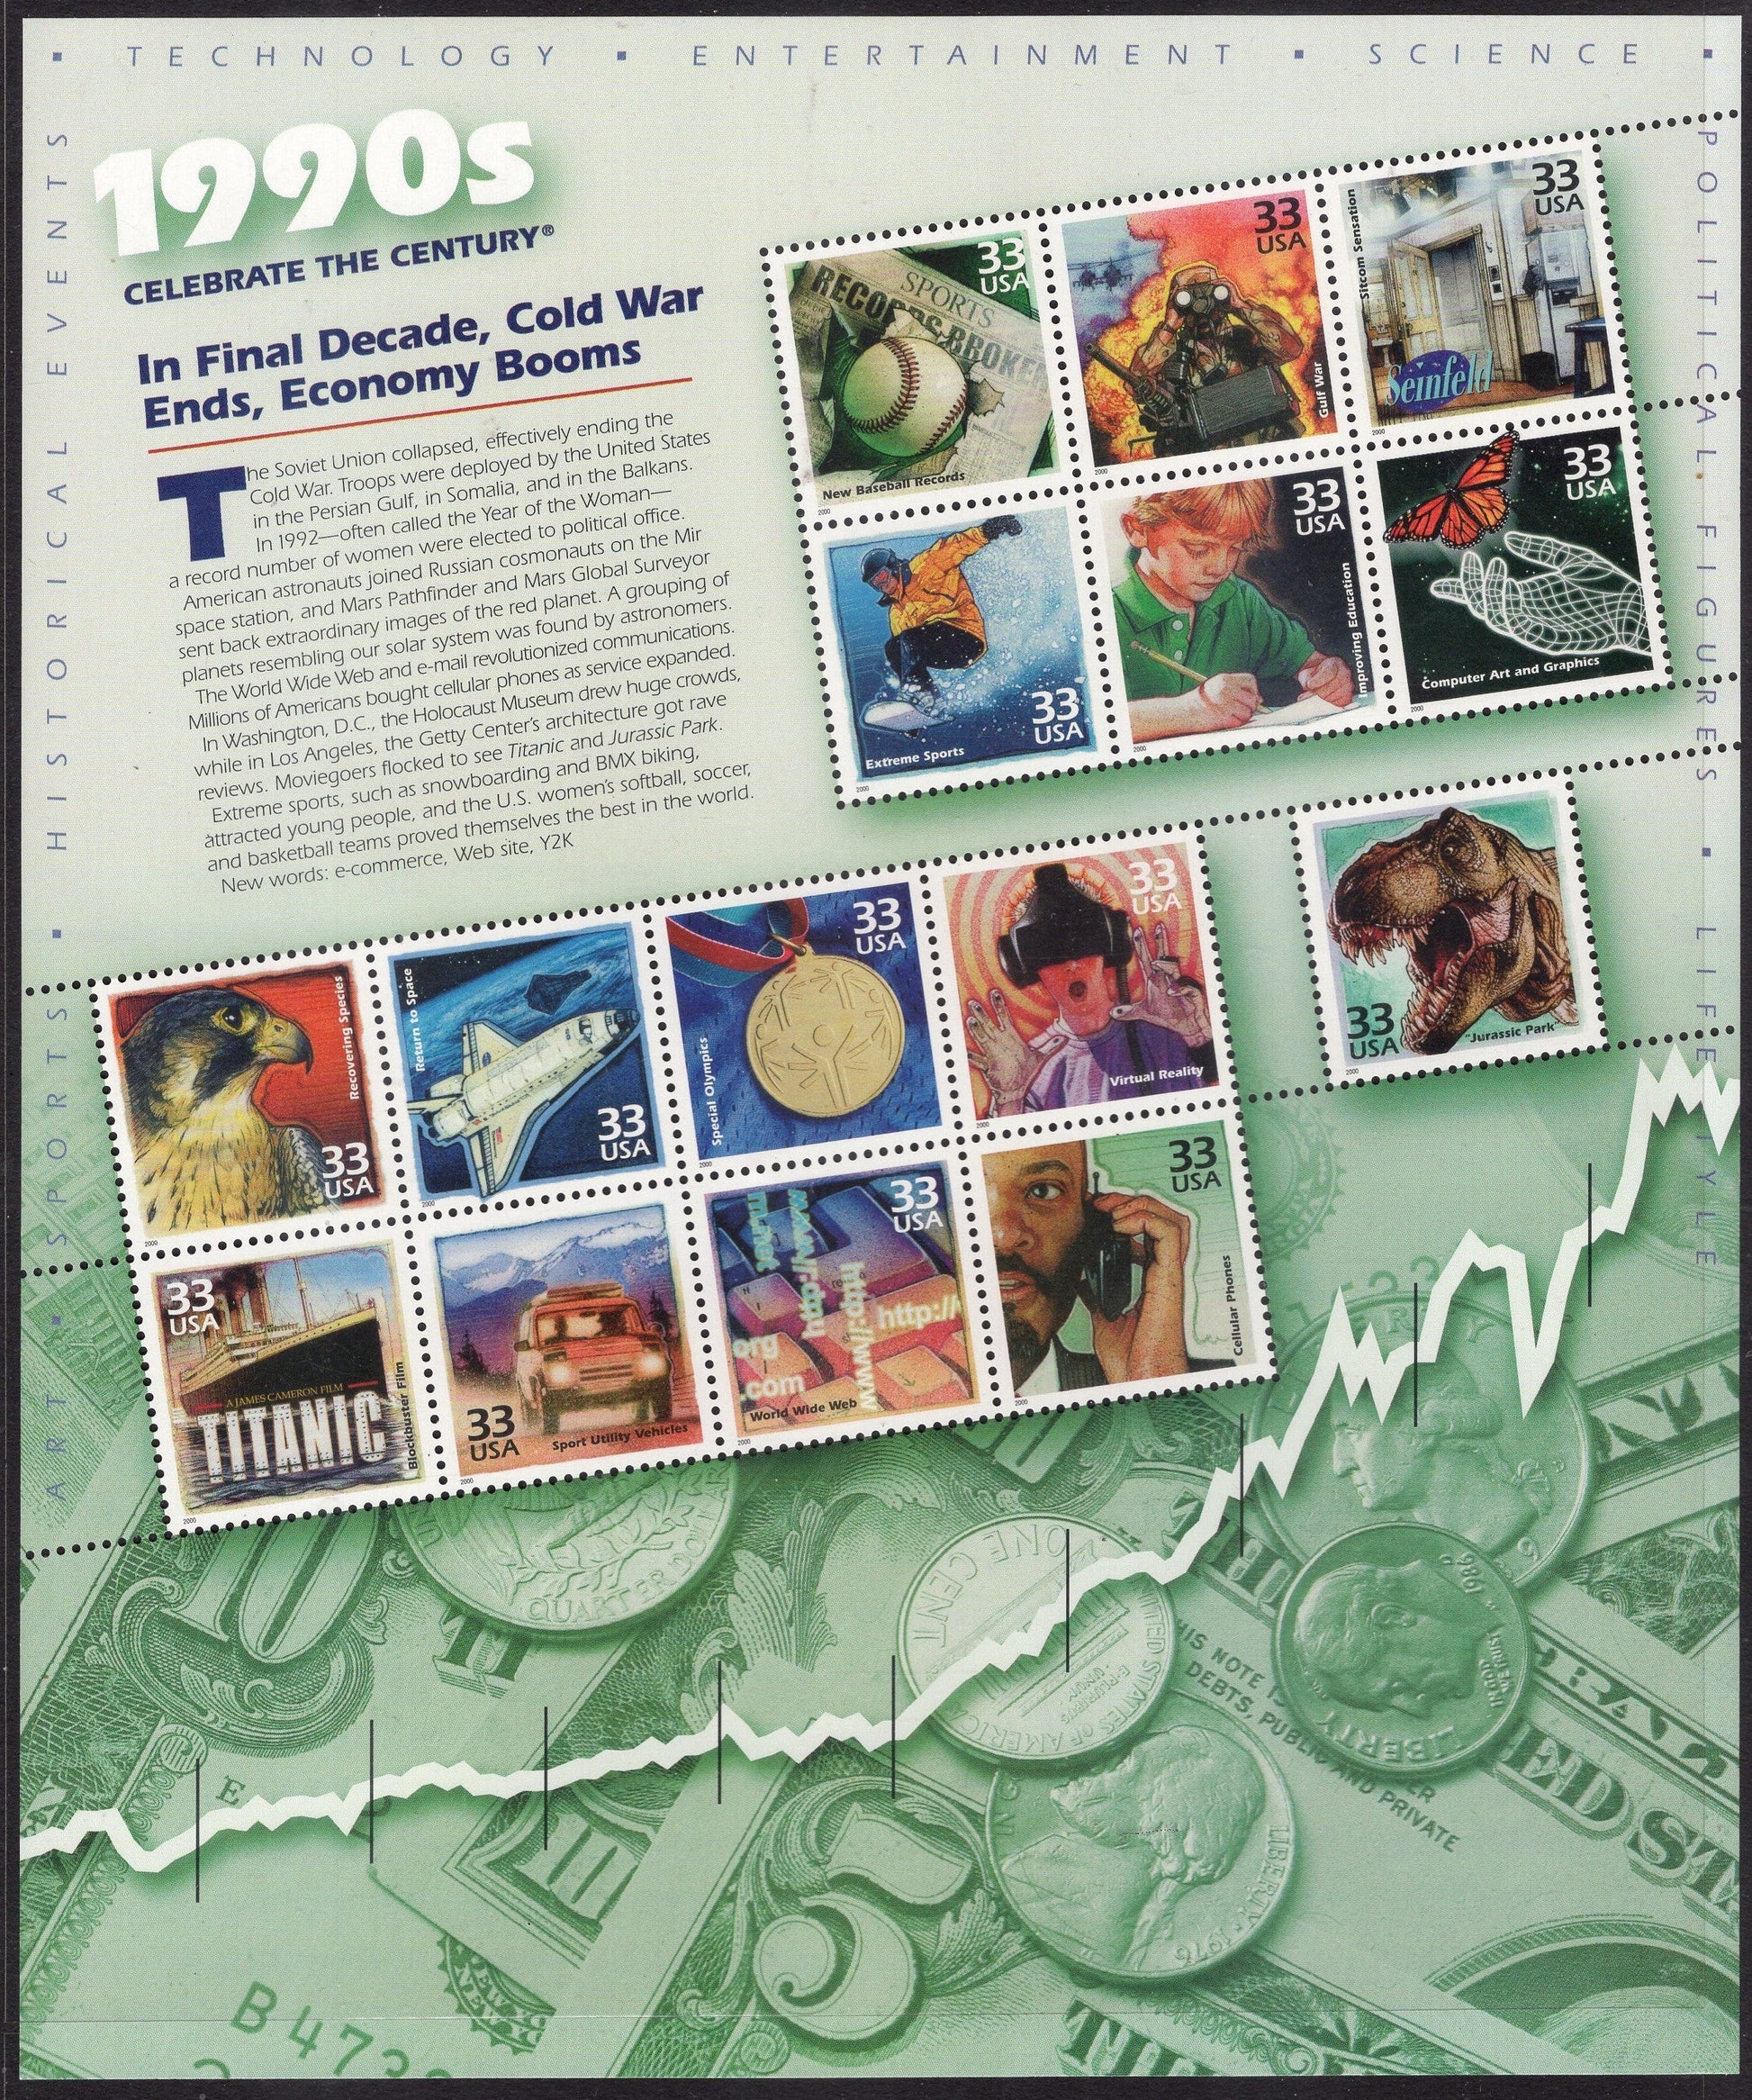 CELEBRATE the 1990's DECADE with this Lovely SHEET Showing 15 Important Events Scenes 1990-1999 - Issued in 2000